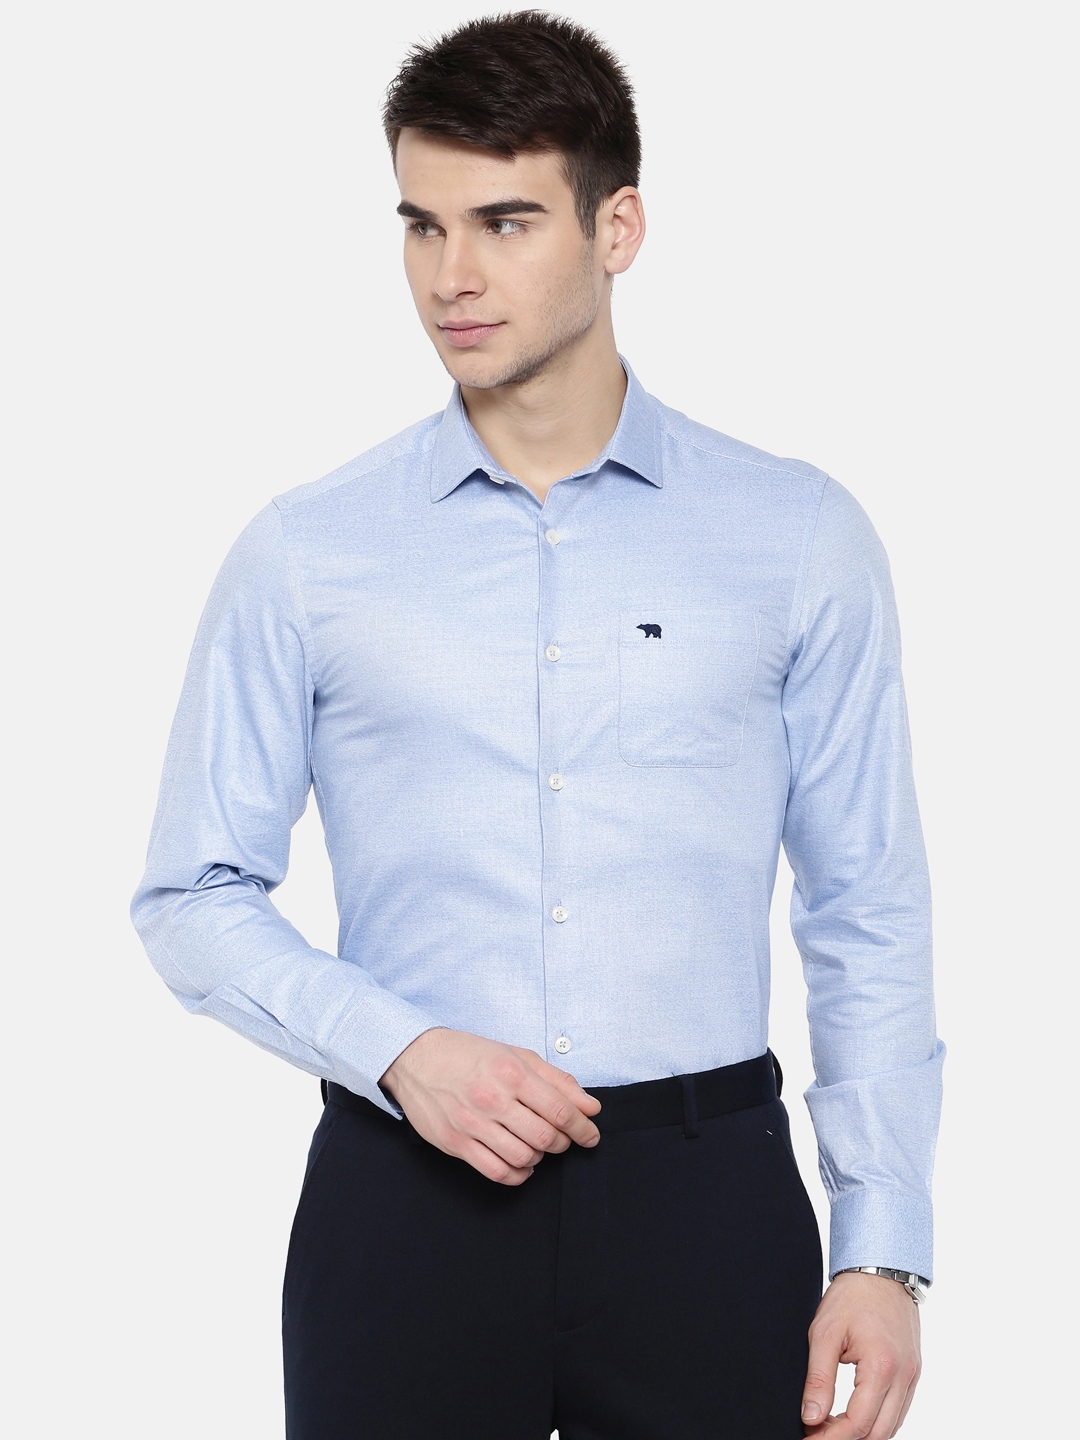 The Bear House | TBH Classic Formal Shirt With Side Panels.